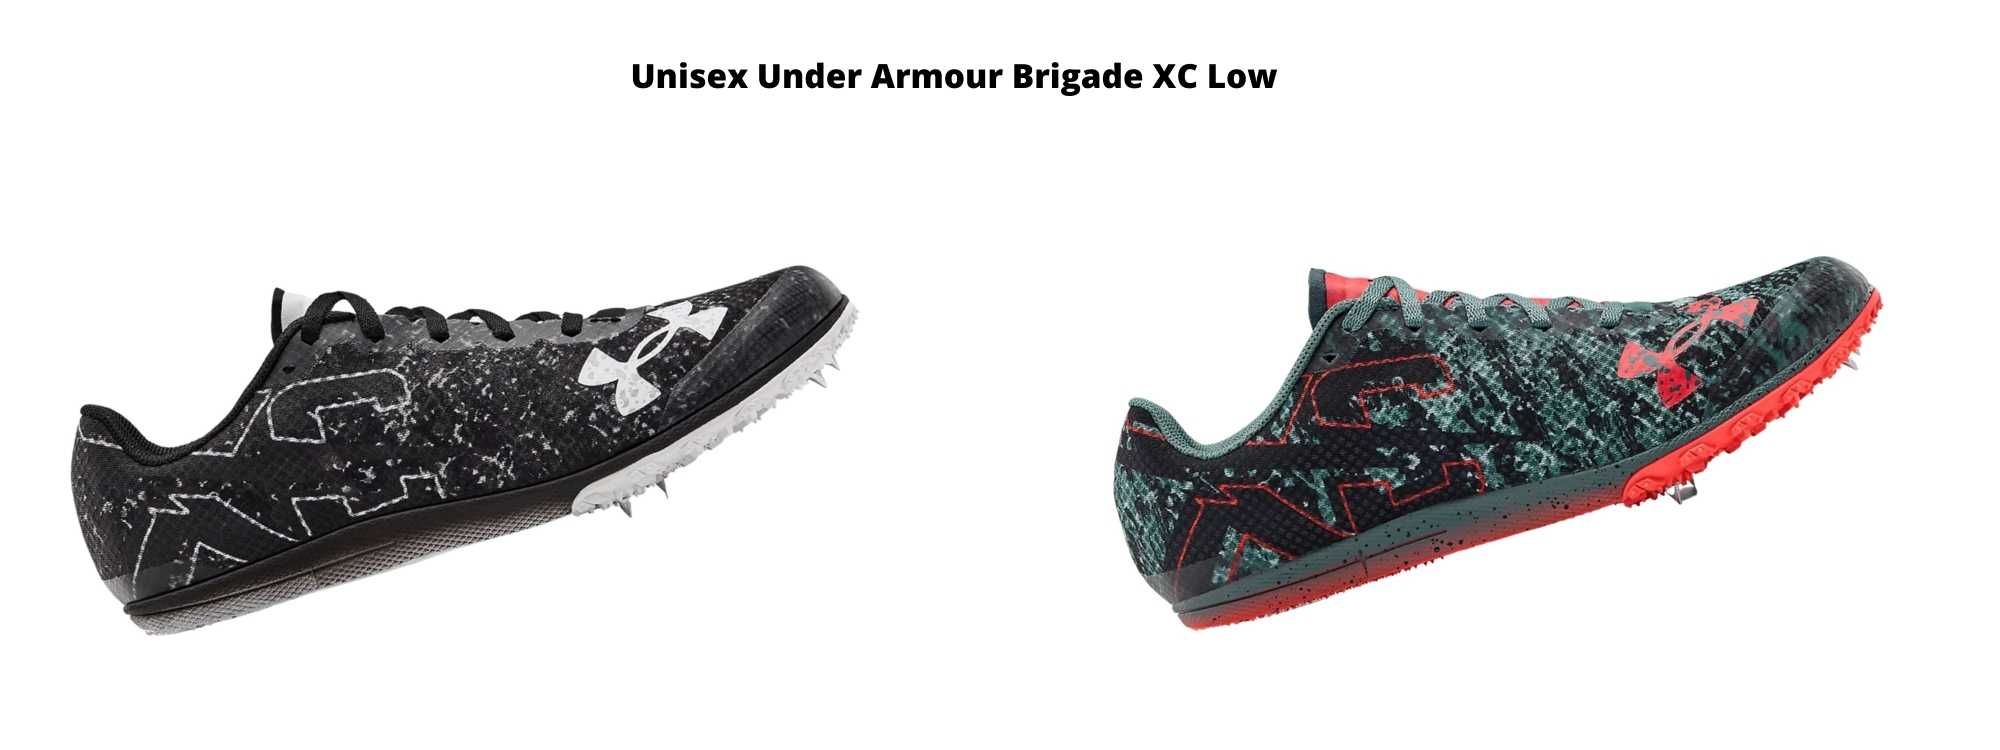 Unisex UA Brigade XC Low spike can be purchased at TRWS in KC